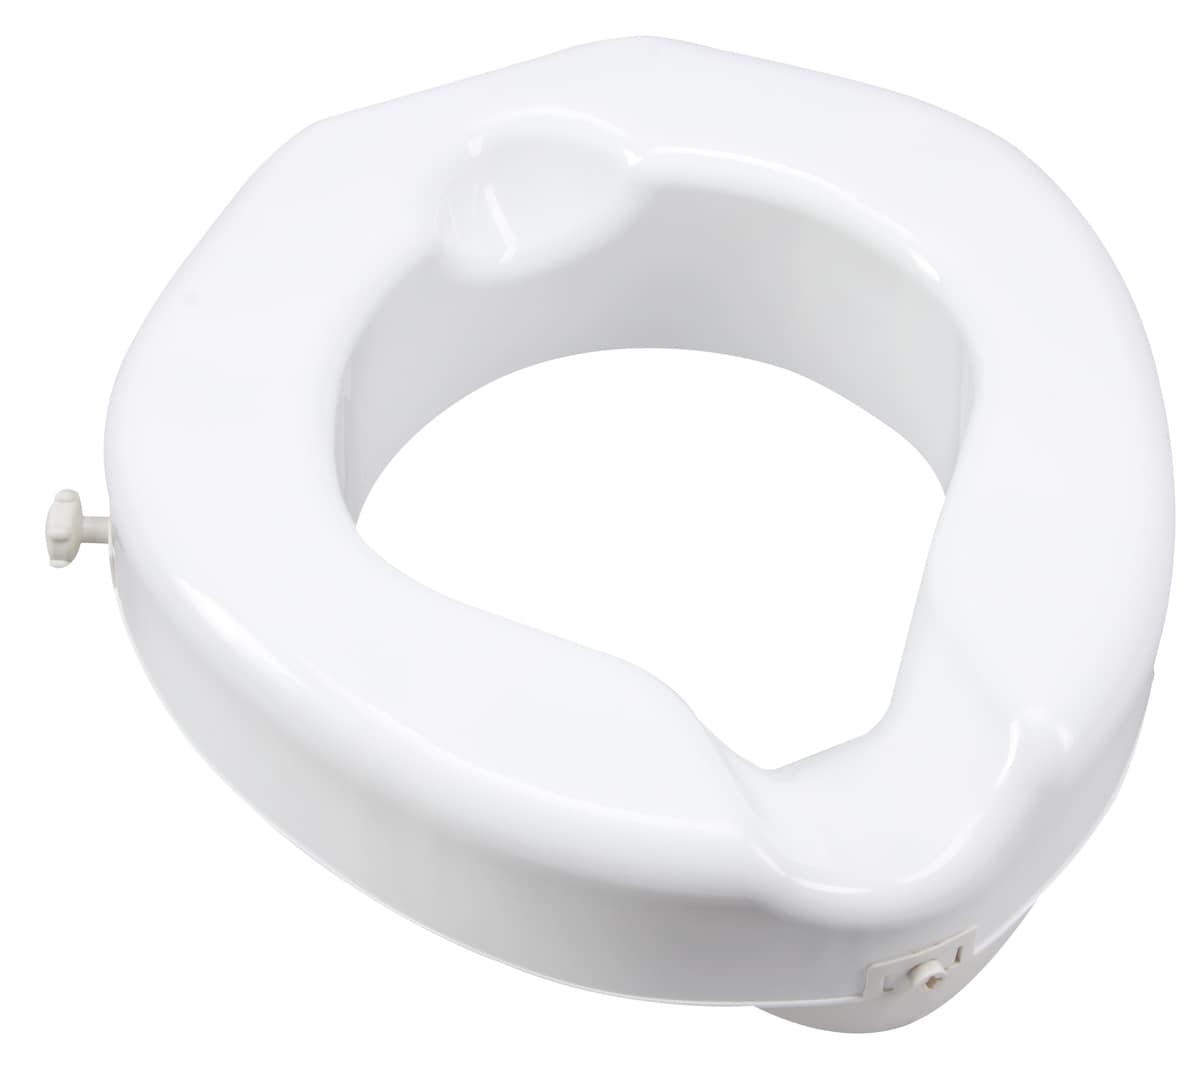 NEW HEALTHSMART 522-1508-1900HS  5" TOILET SEAT RISER-WHITE   MADE IN THE USA! 